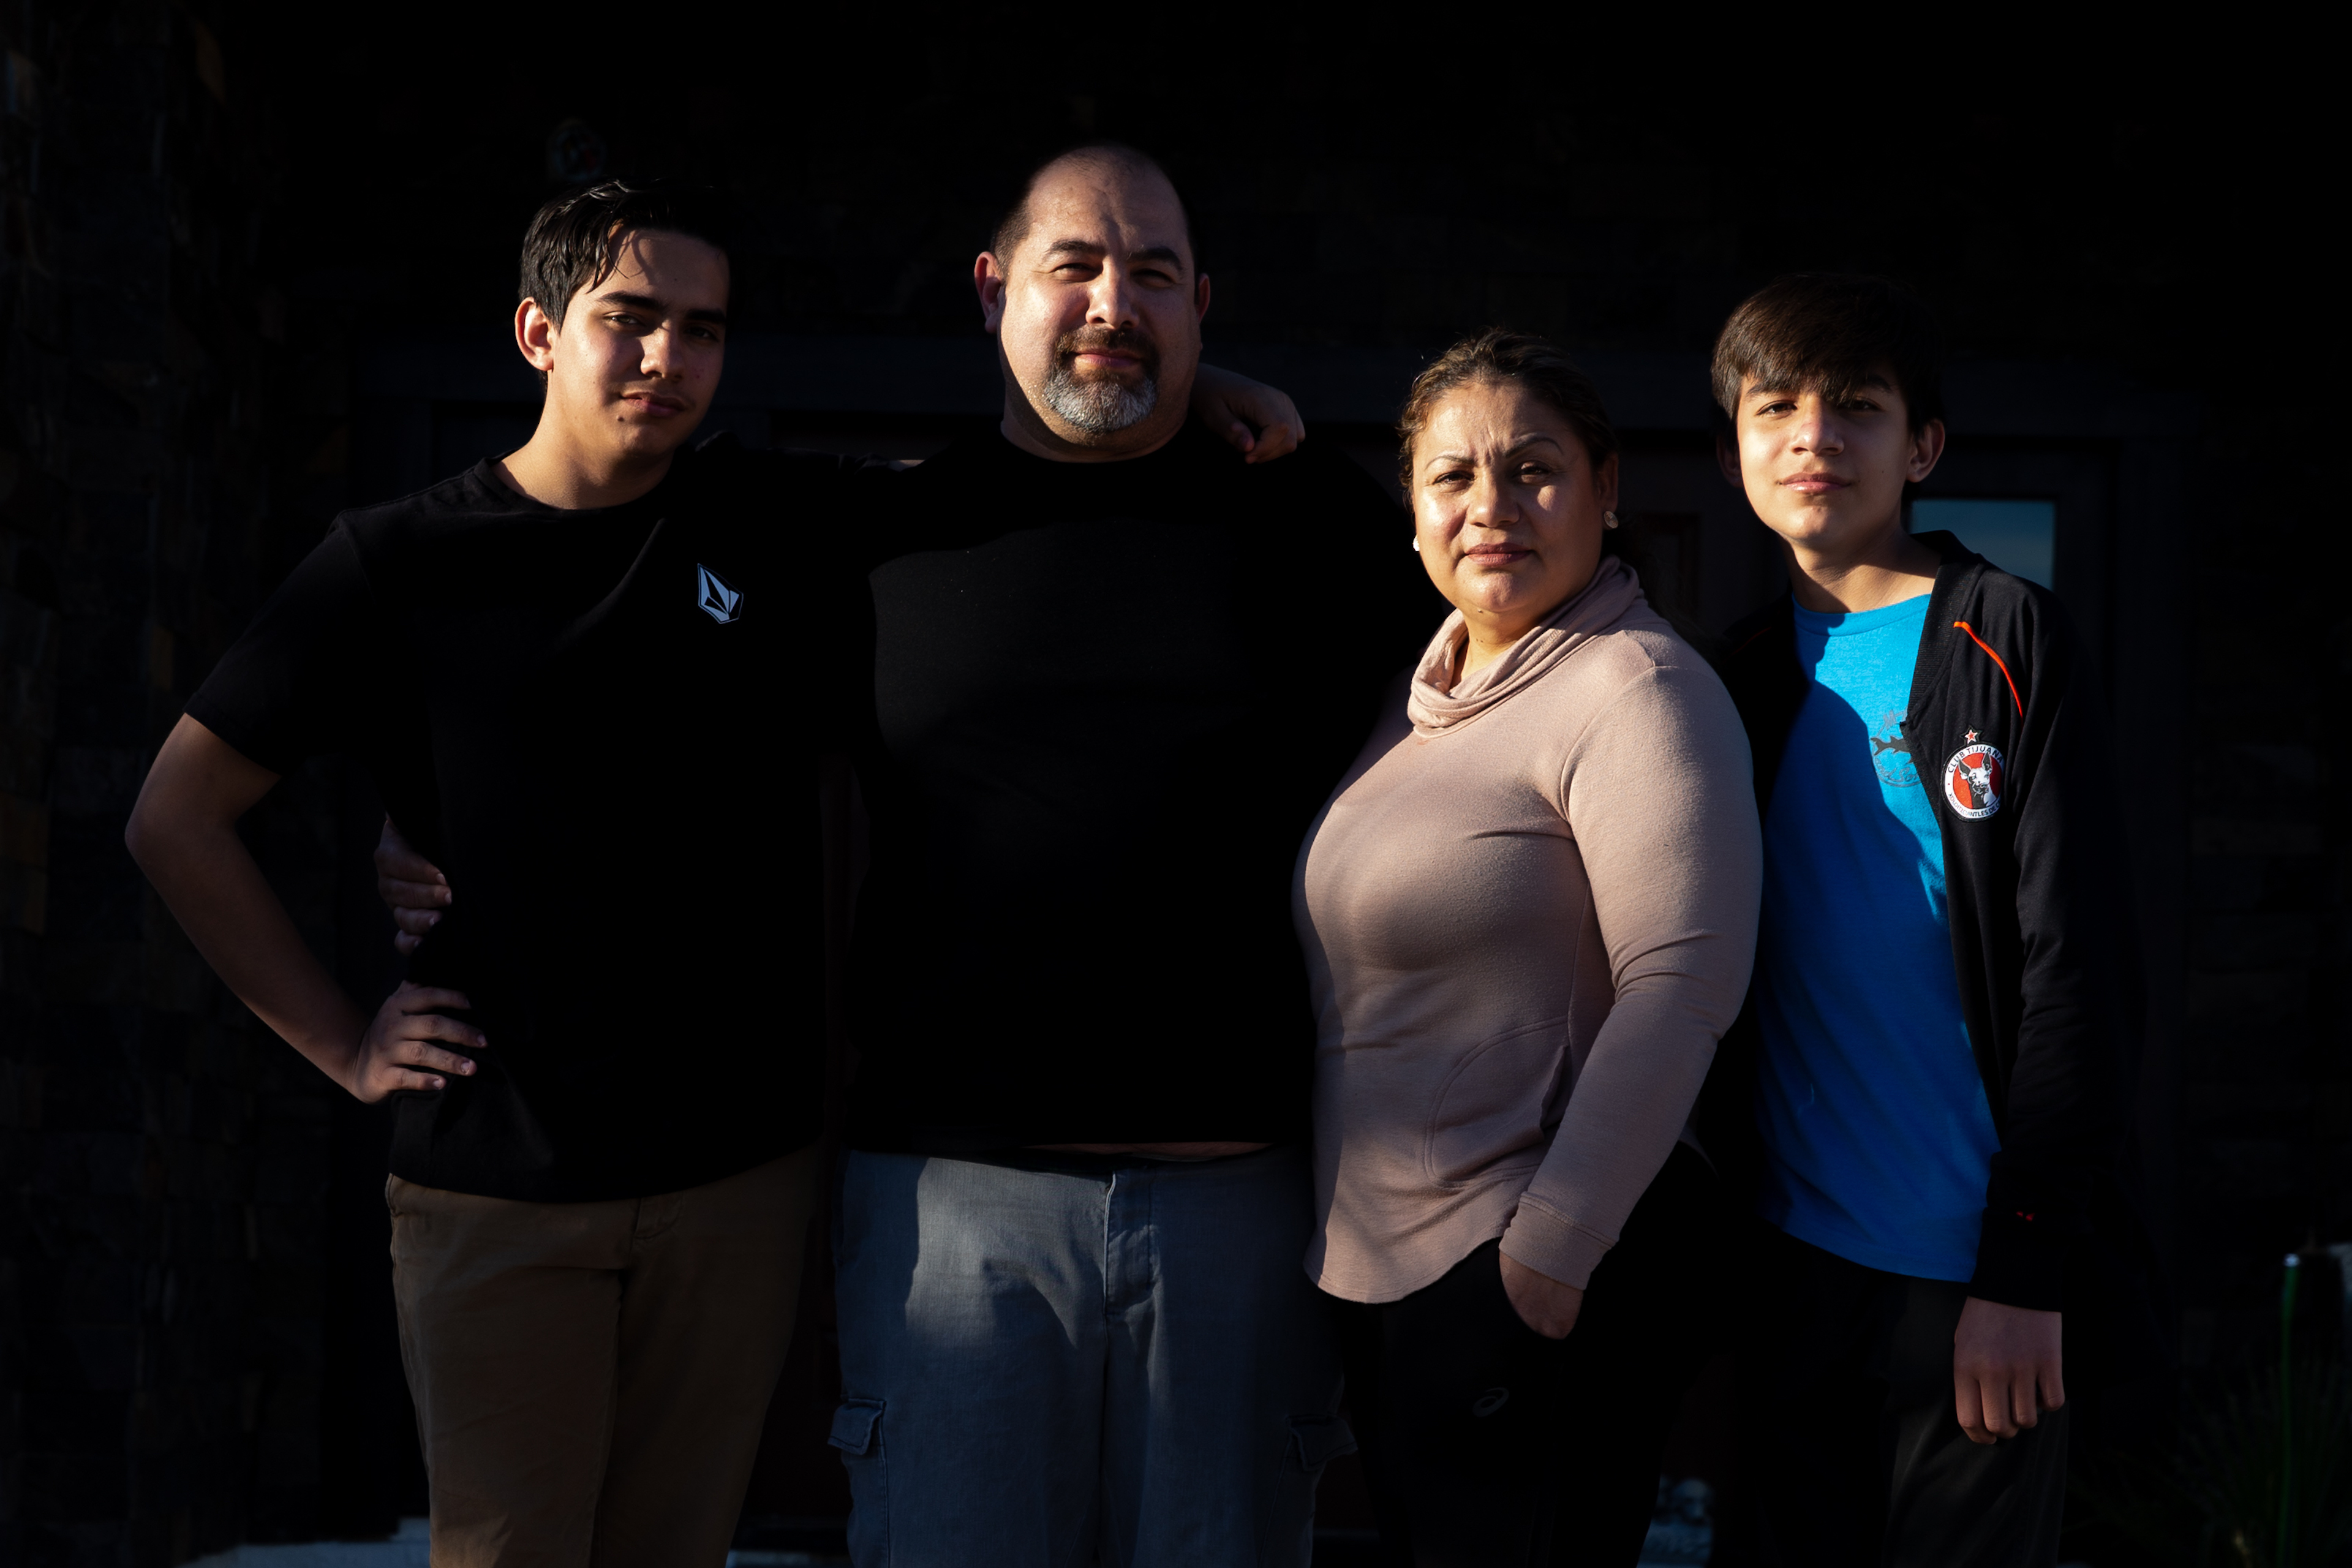 After Medical Bills Broke the Bank, This Family Headed to Mexico for Care